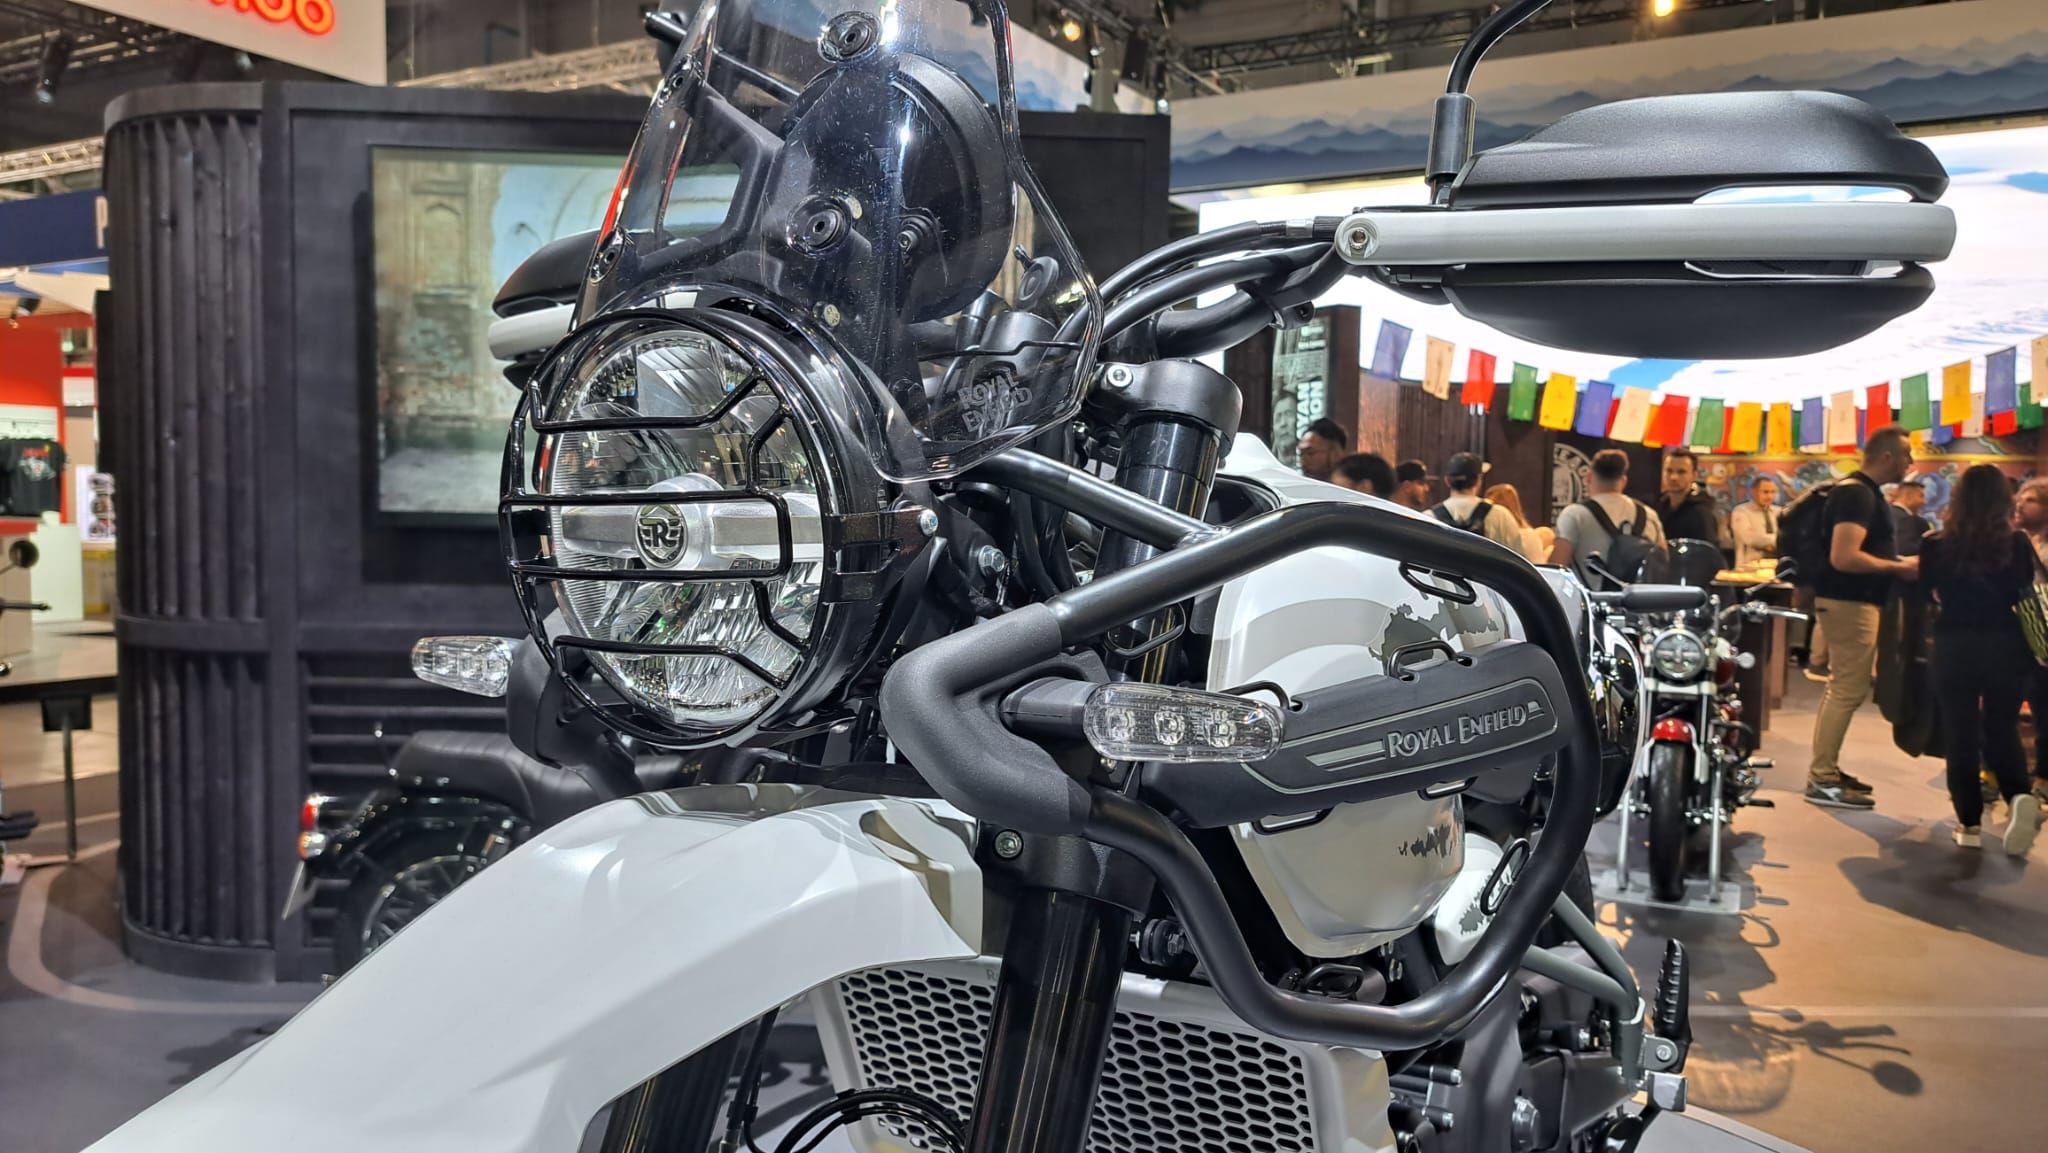 Royal Enfield Himalayan 450 First Look: Design Highlights And Cool Features